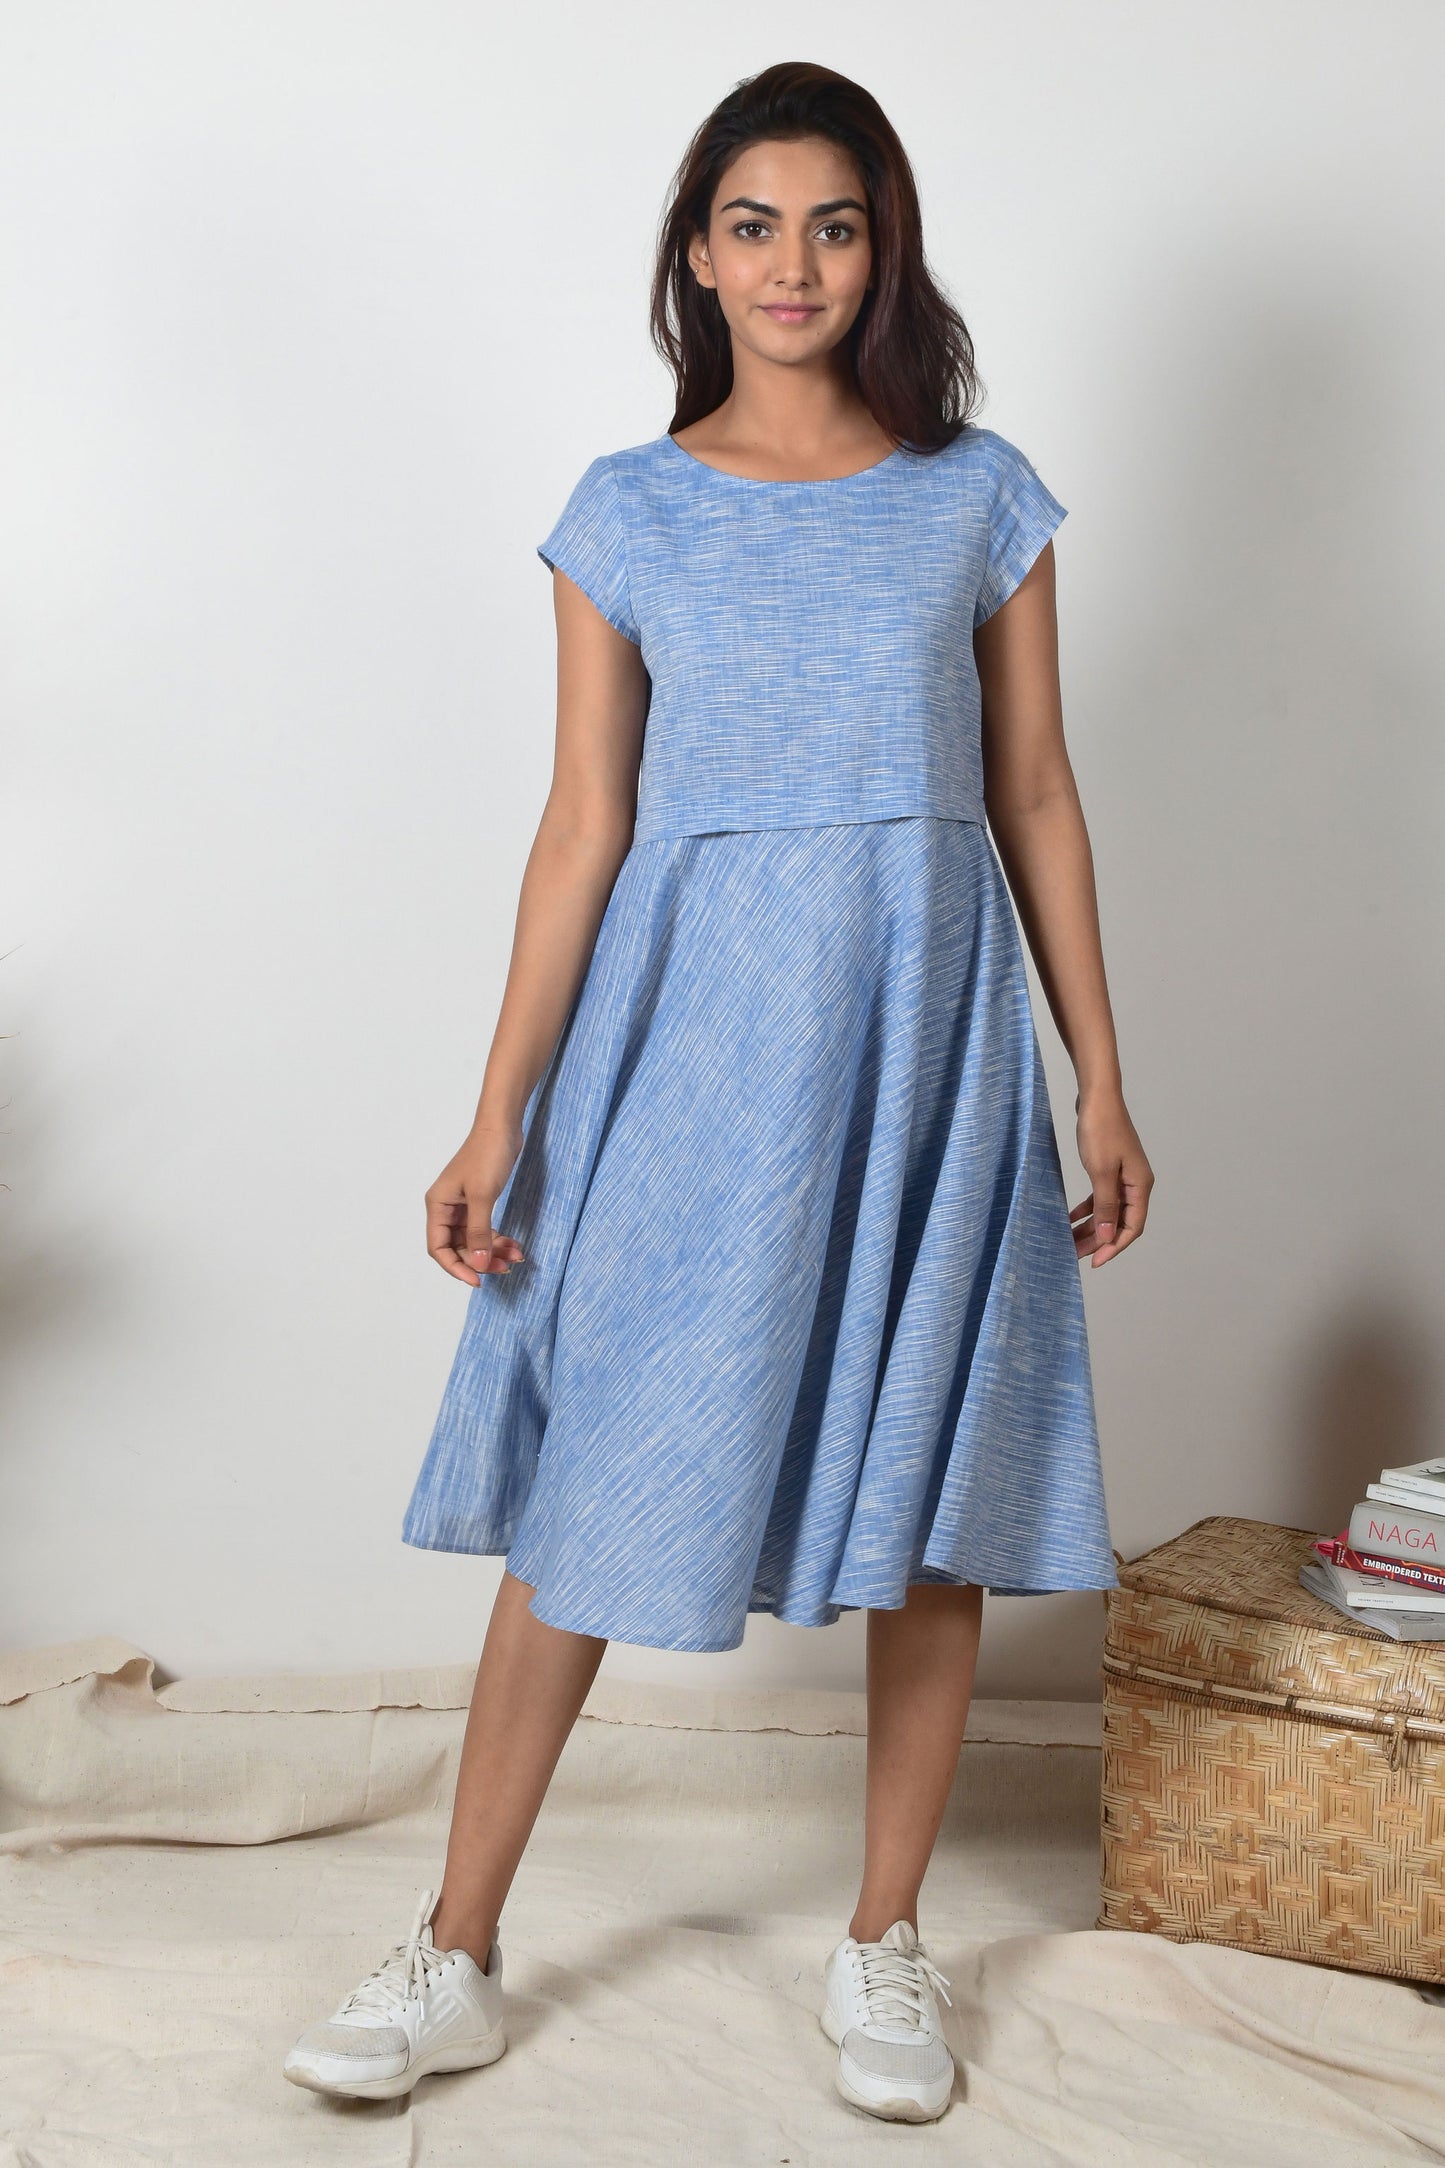 Indian girl with black hair and white sneakers wearing a blue a-line dress made with cotton that hand spun and hand woven.